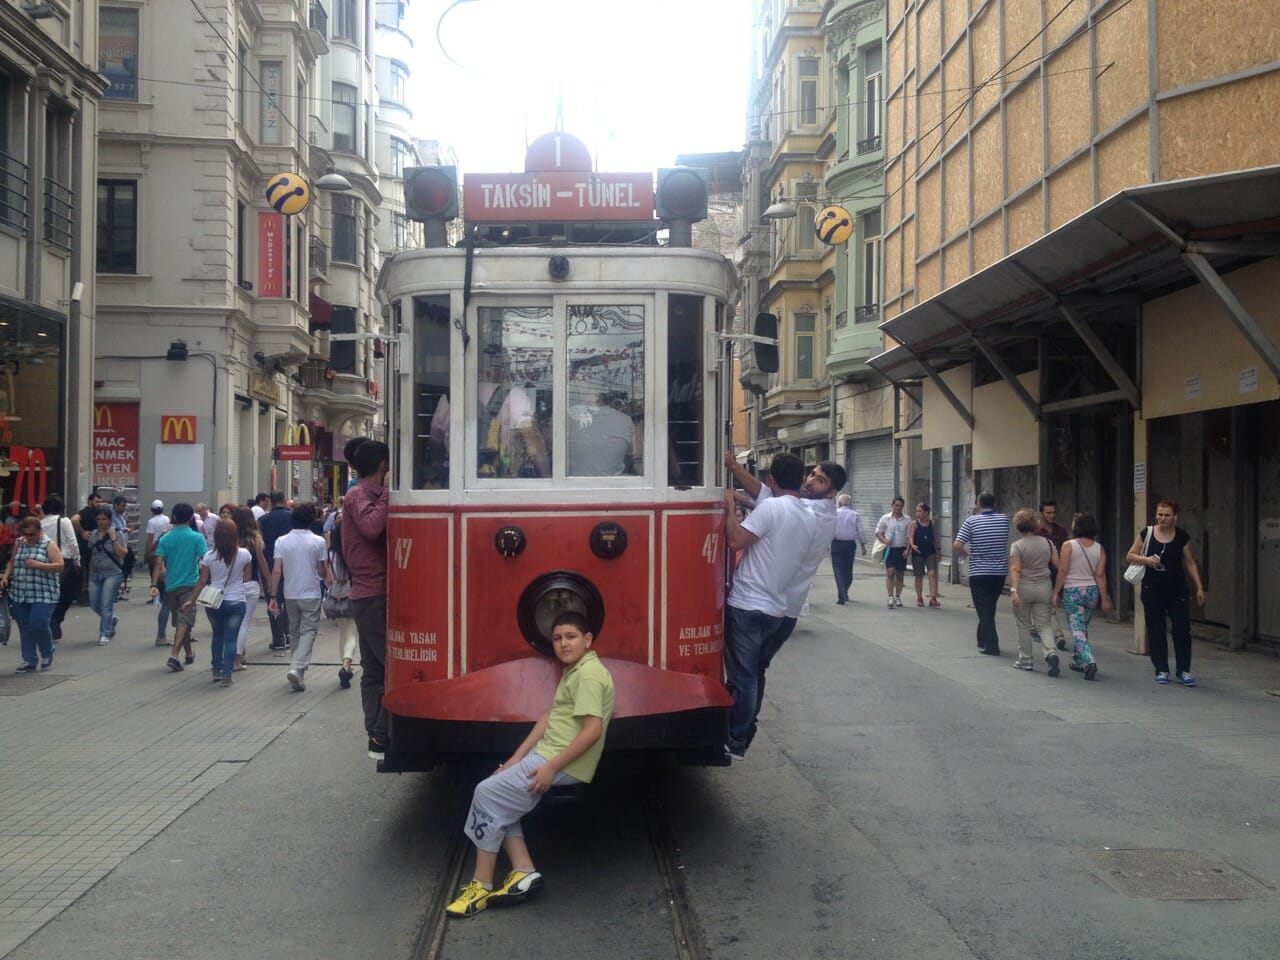 People riding an old tram in Istanbul.